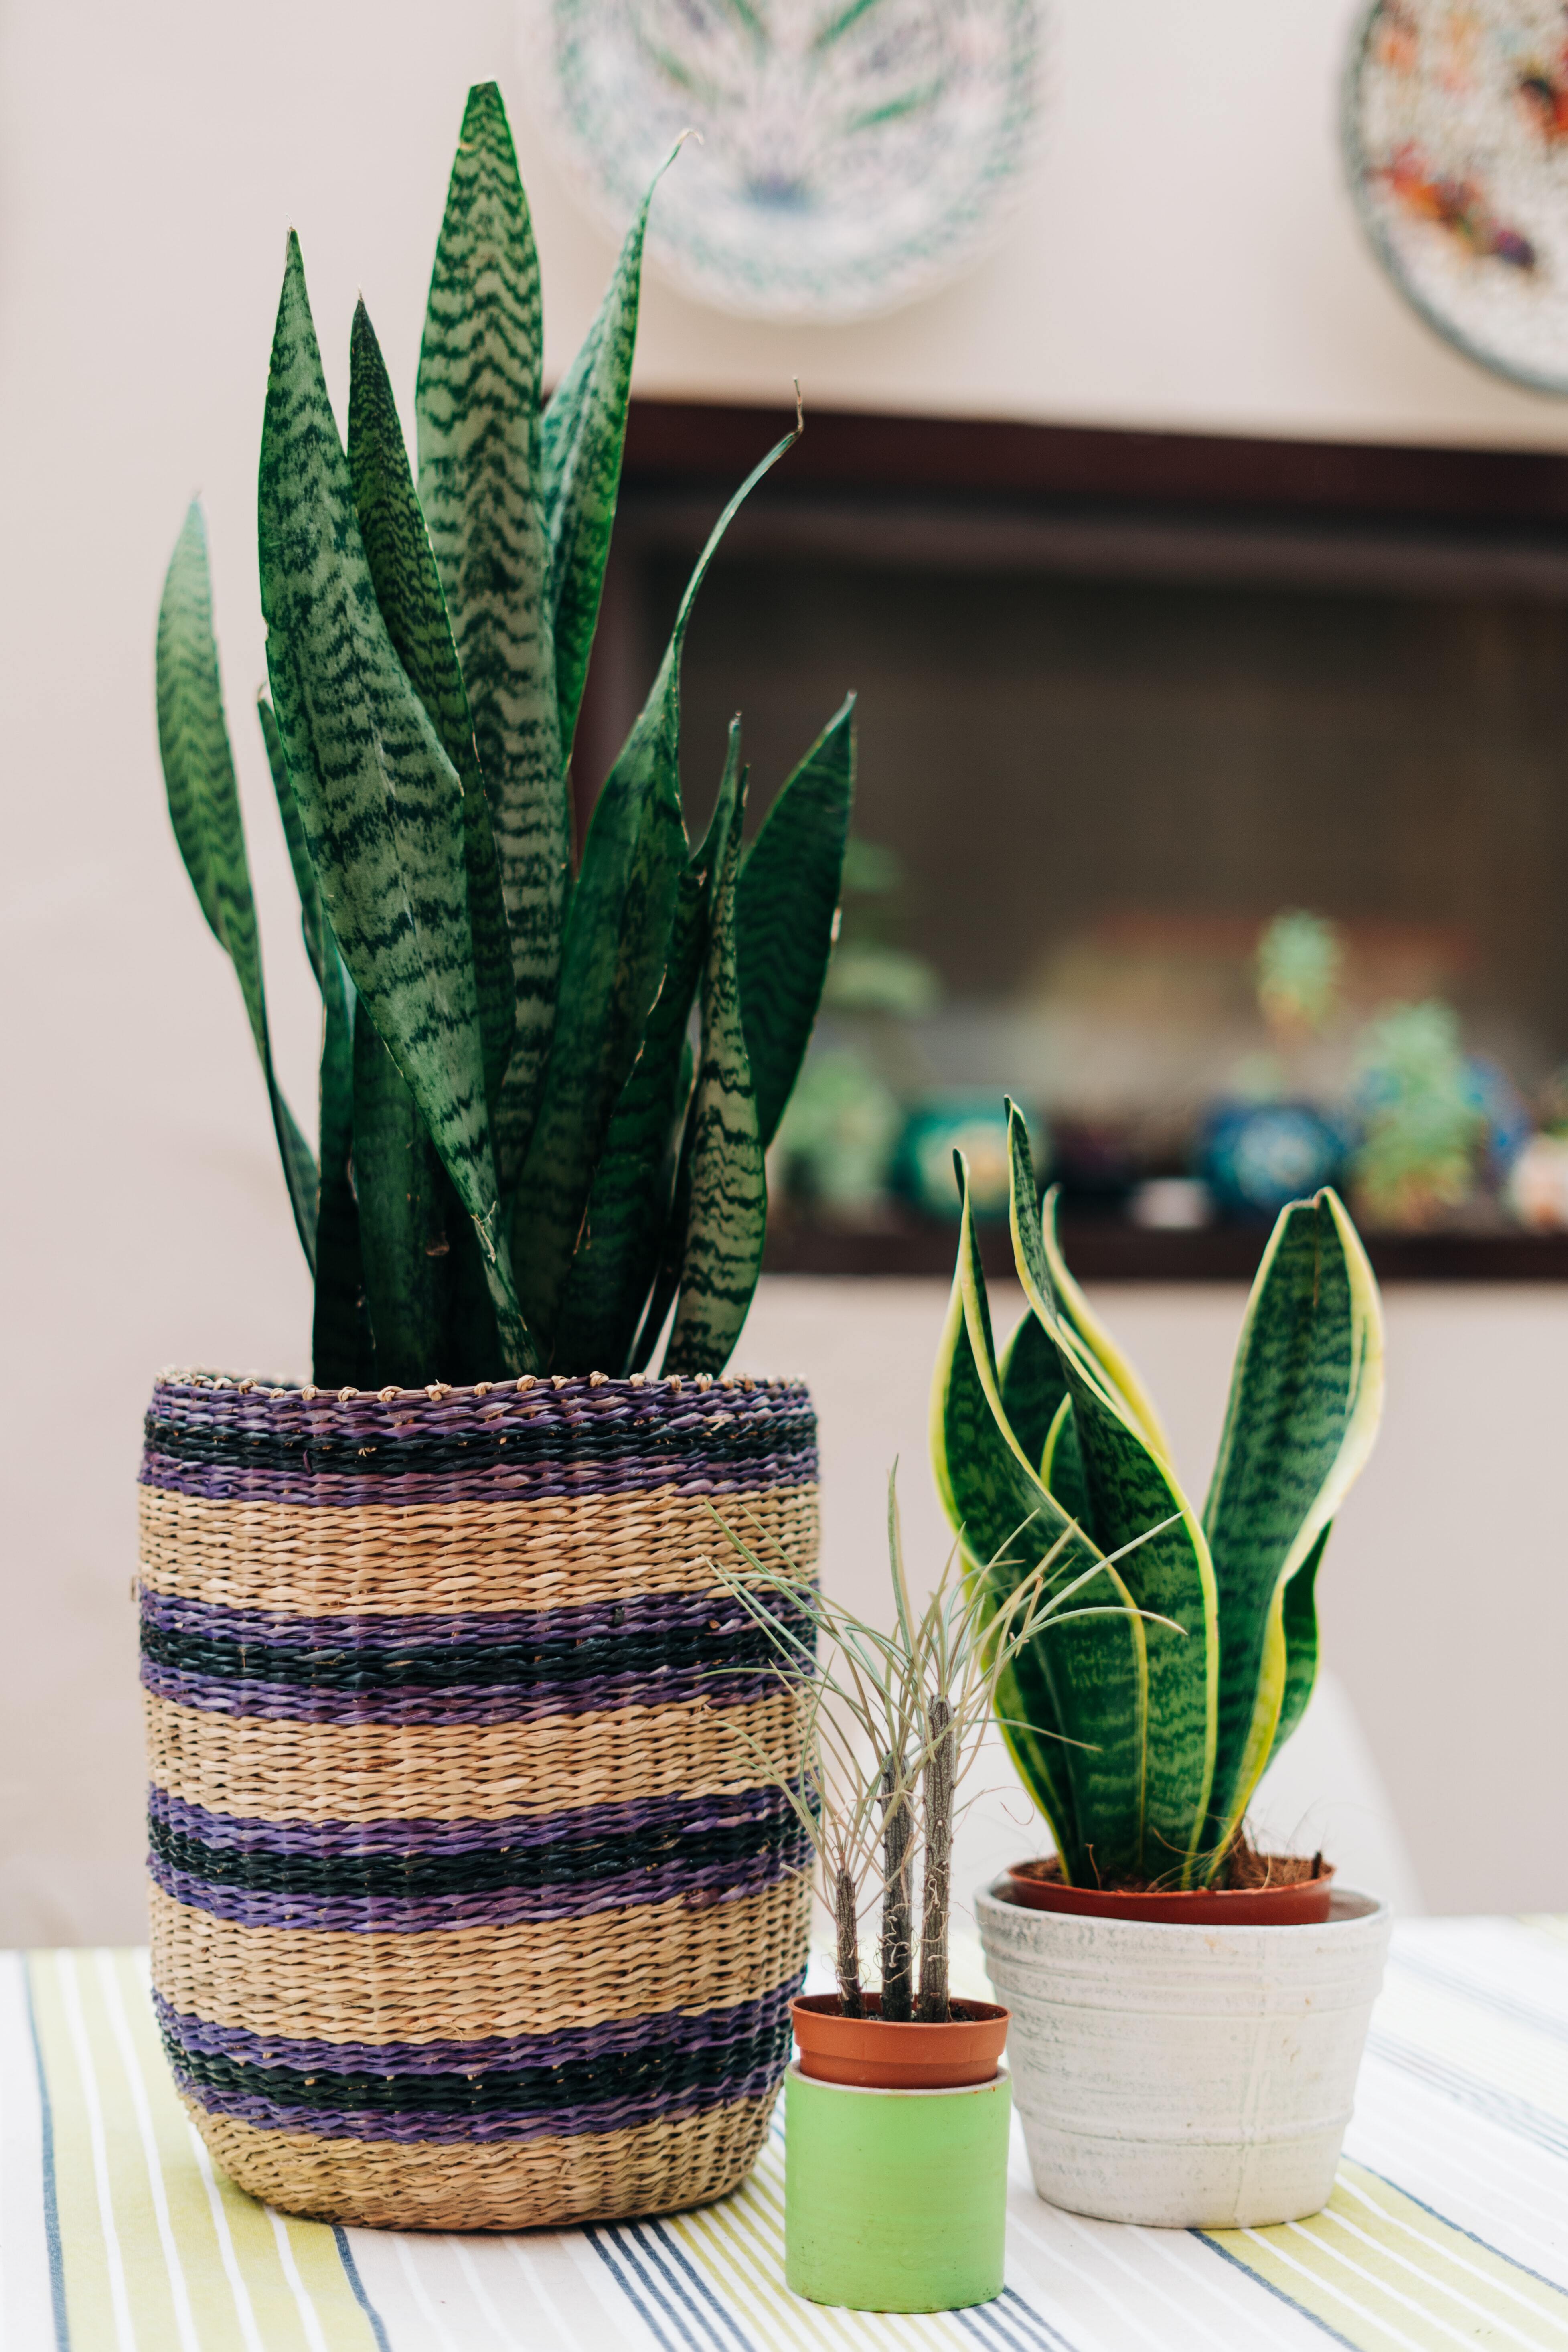 How to have an indoor garden with snake plants